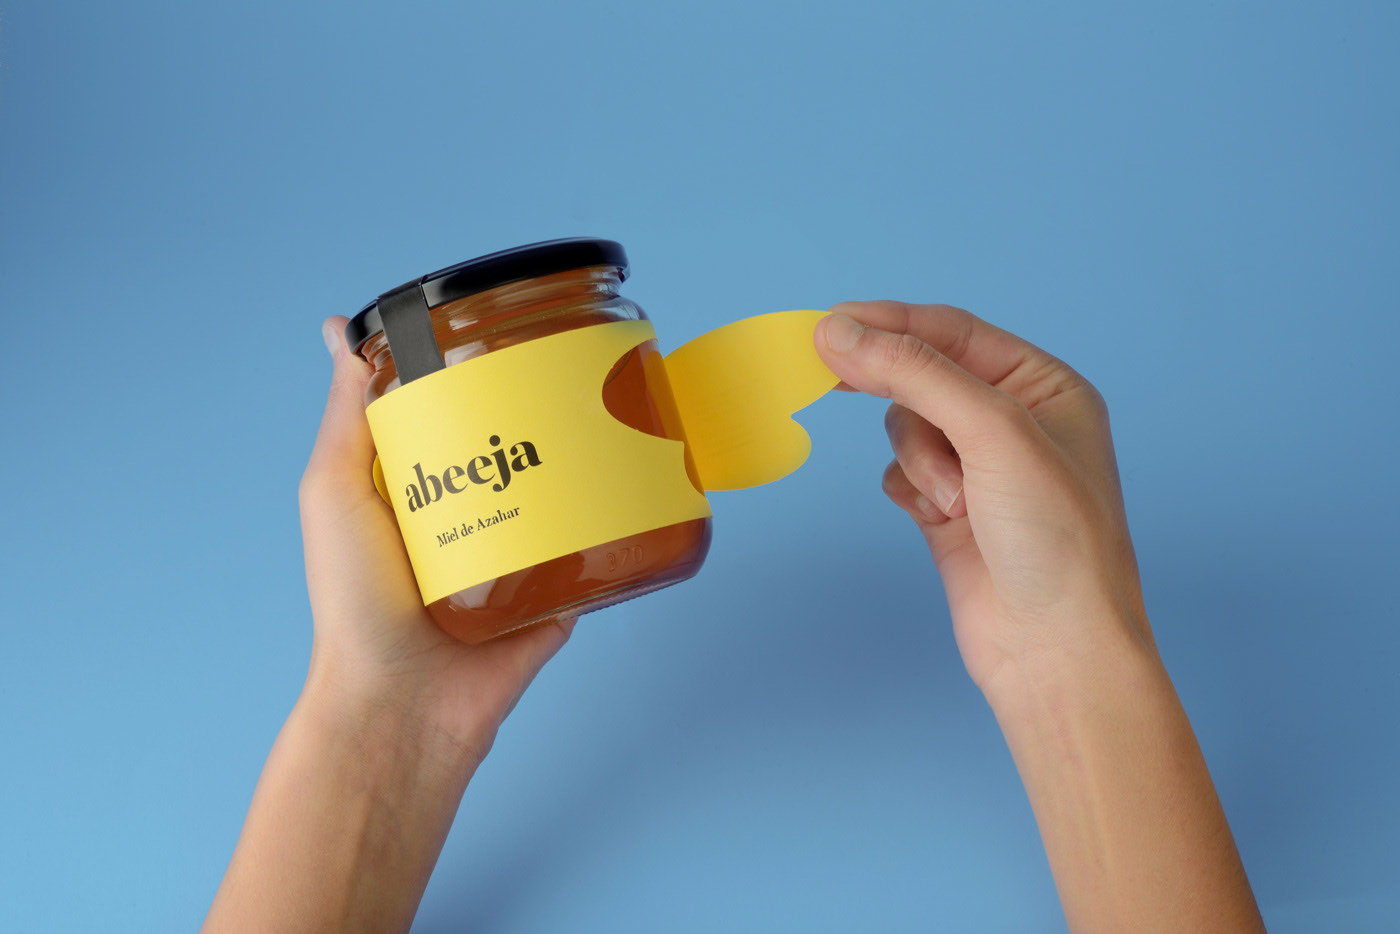 Abeeja — Honey Packaging by Andrés Guerrero - Creative Work - $i